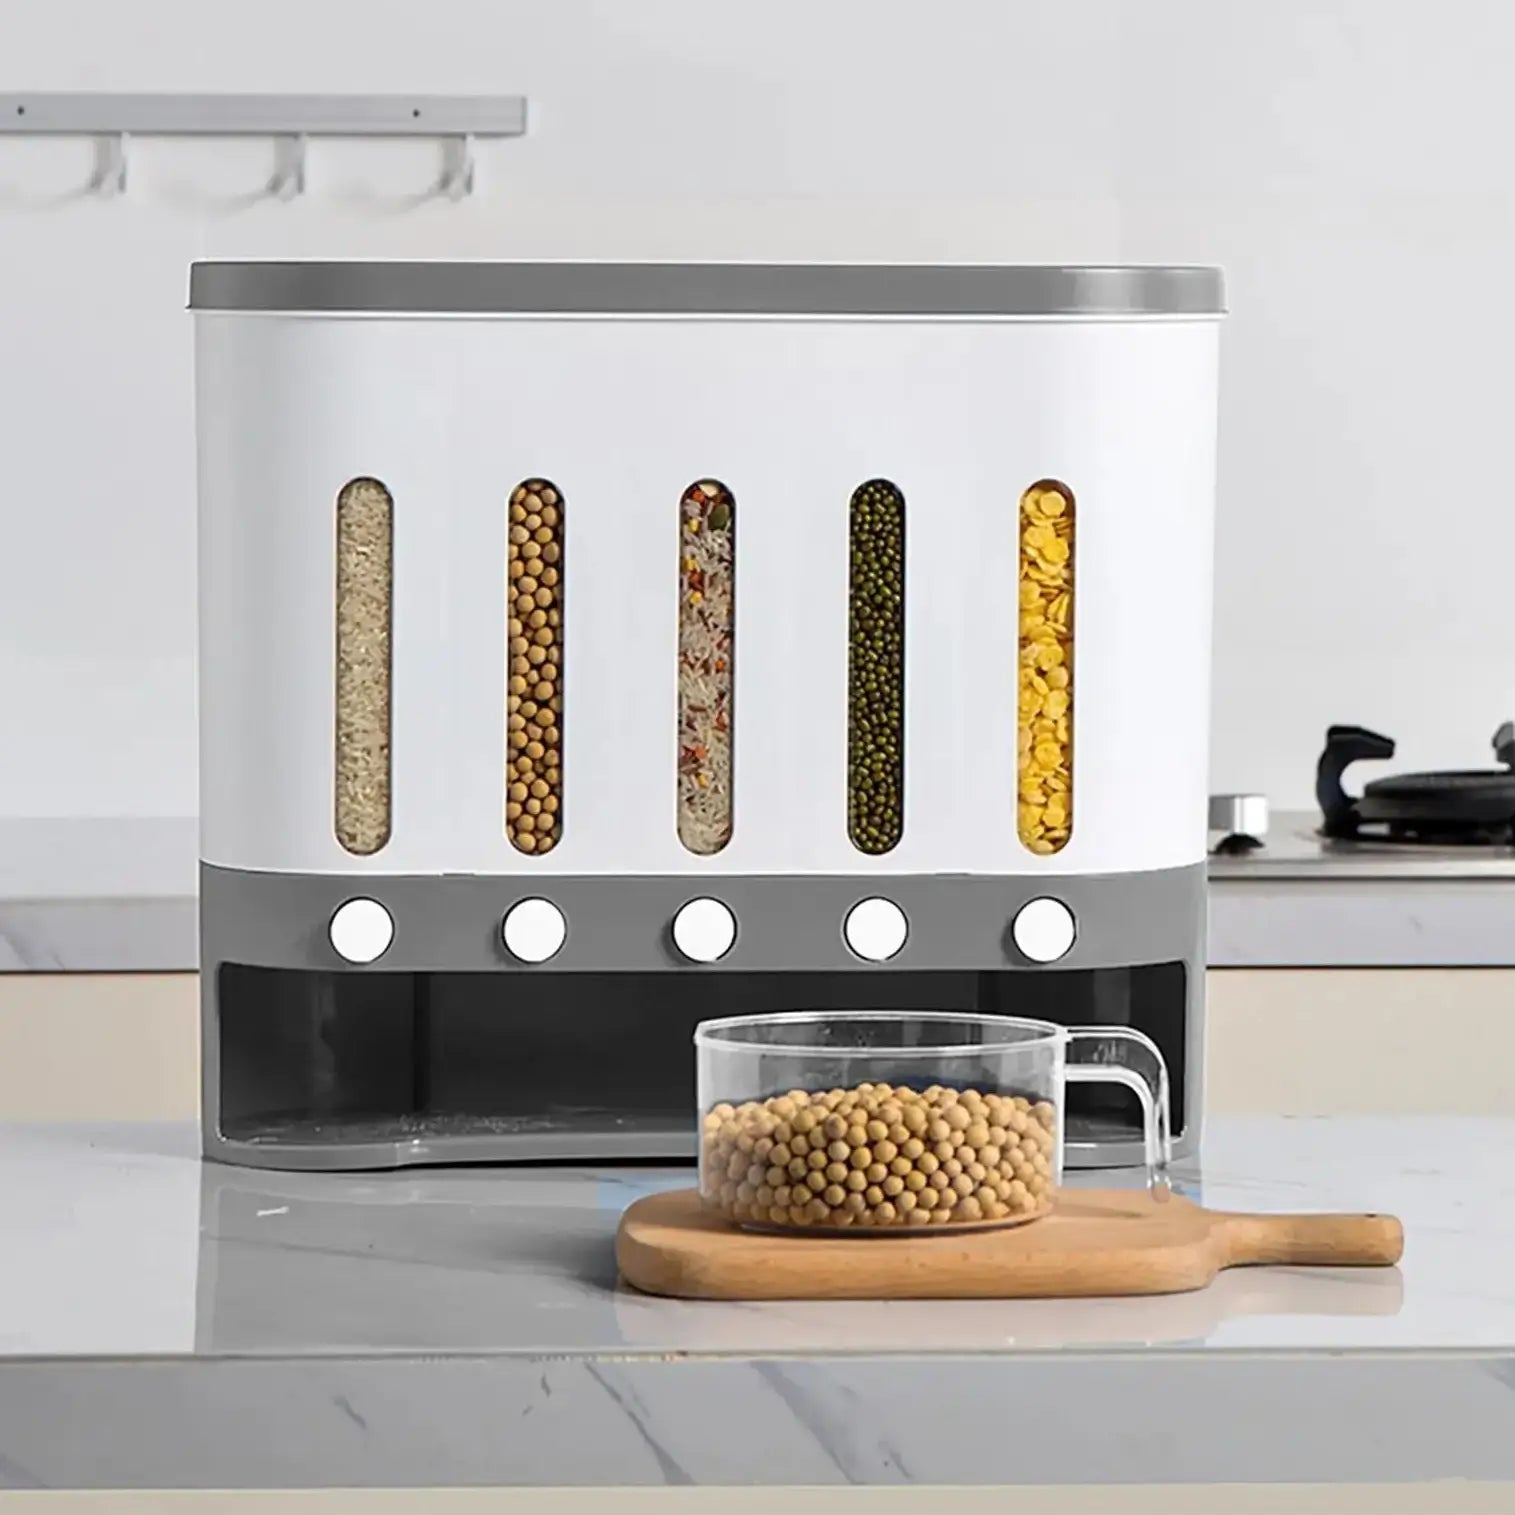 The Cereal Dispenser with its 5 grids full, Resting on a kitchen bench top with a plastic jug full of grains on a chop board sitting in front